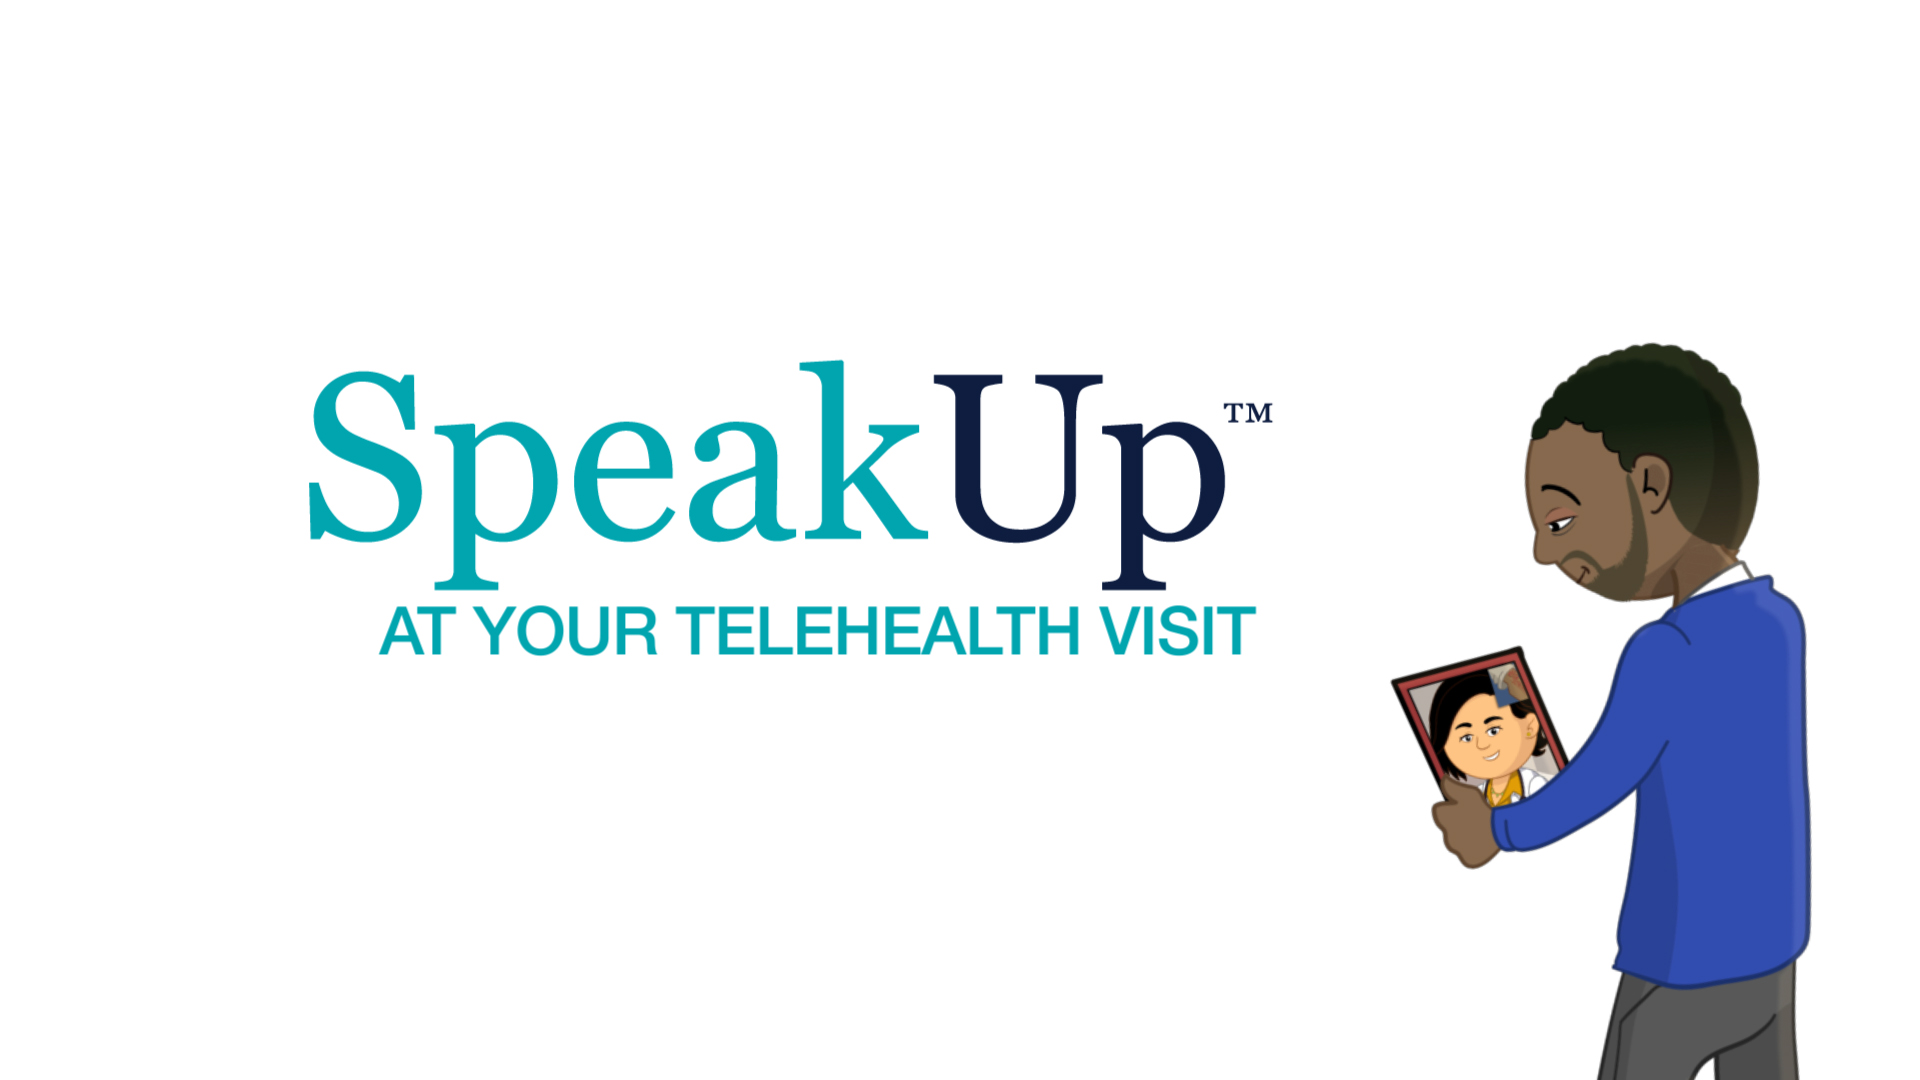 Pictured is a logo for the Speak Up At Your Telehealth Visit patient safety campaign from The Joint Commission.